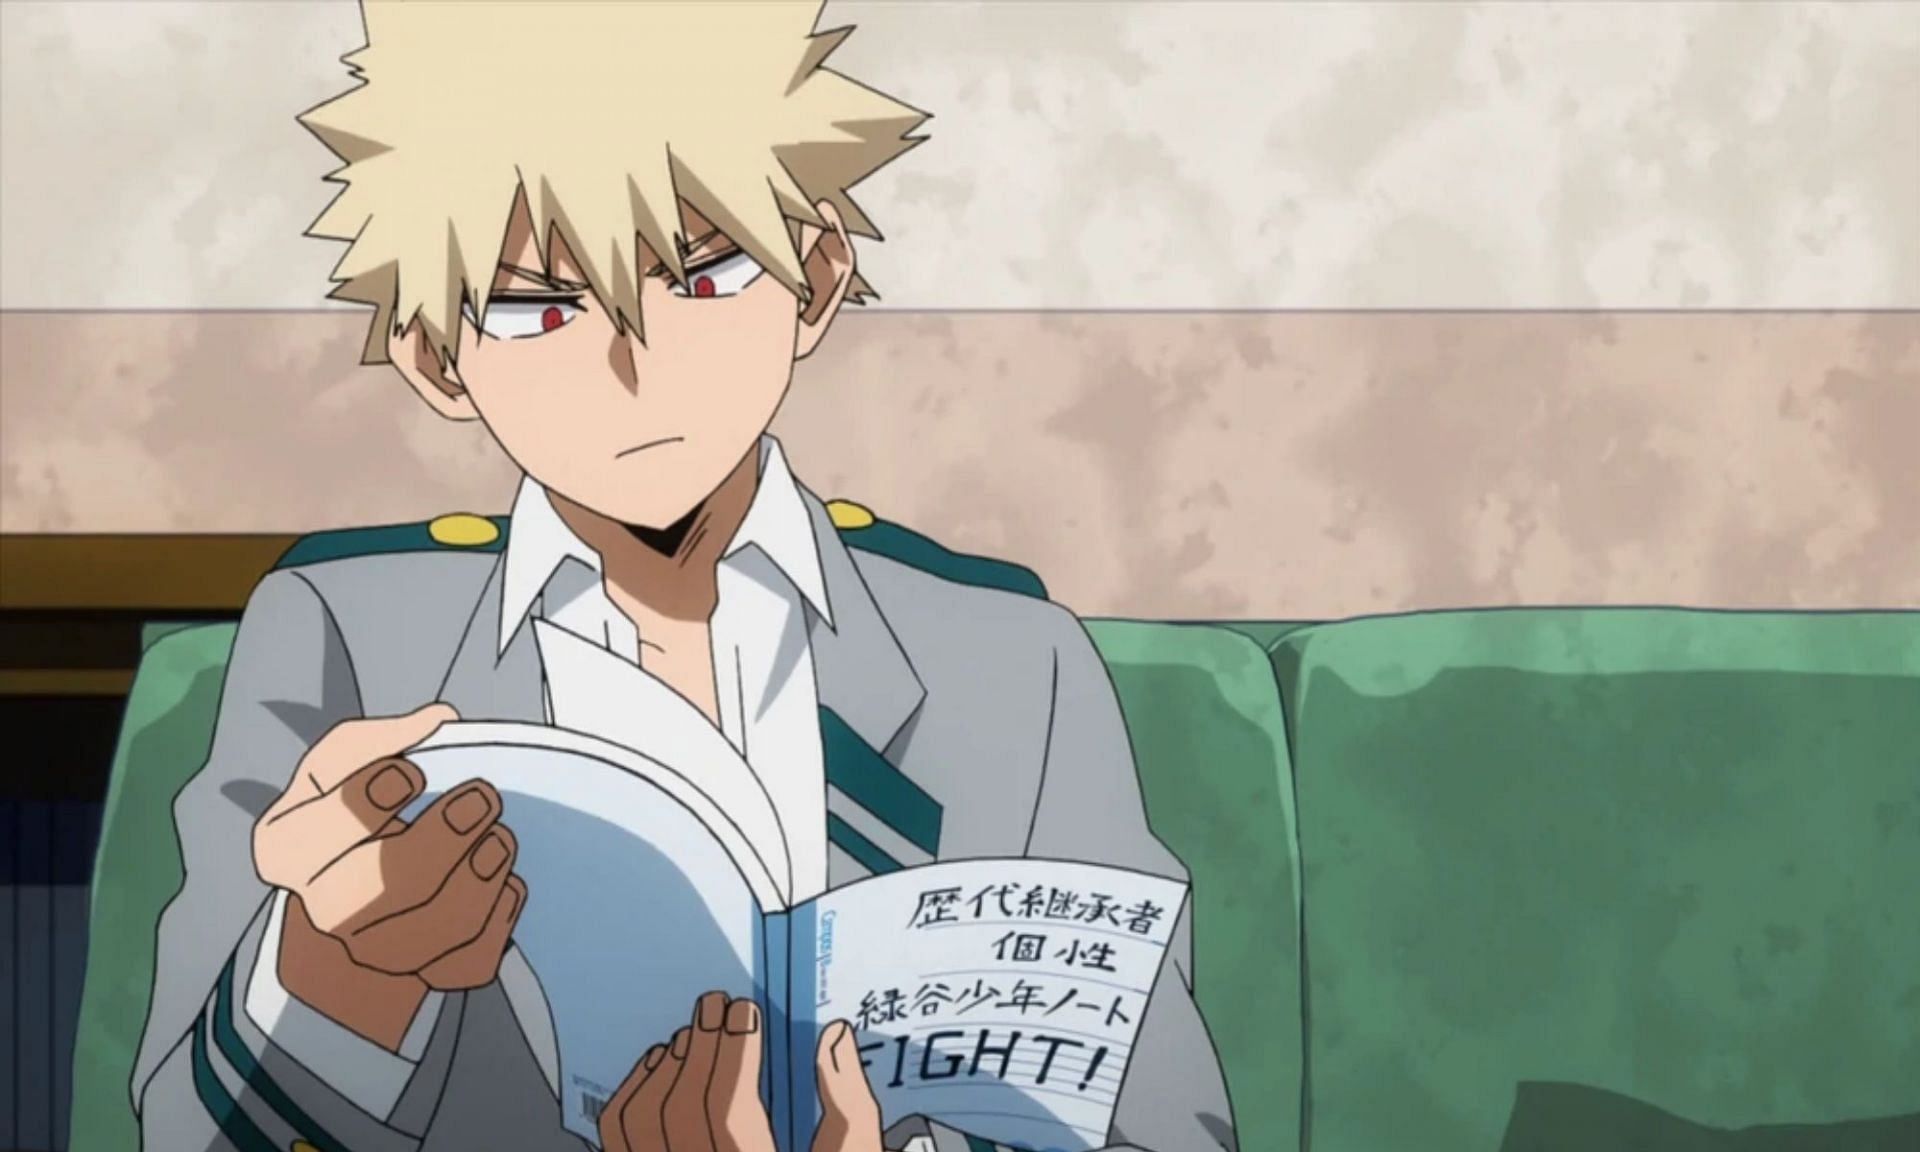 Bakugo has to wonder how it all ends